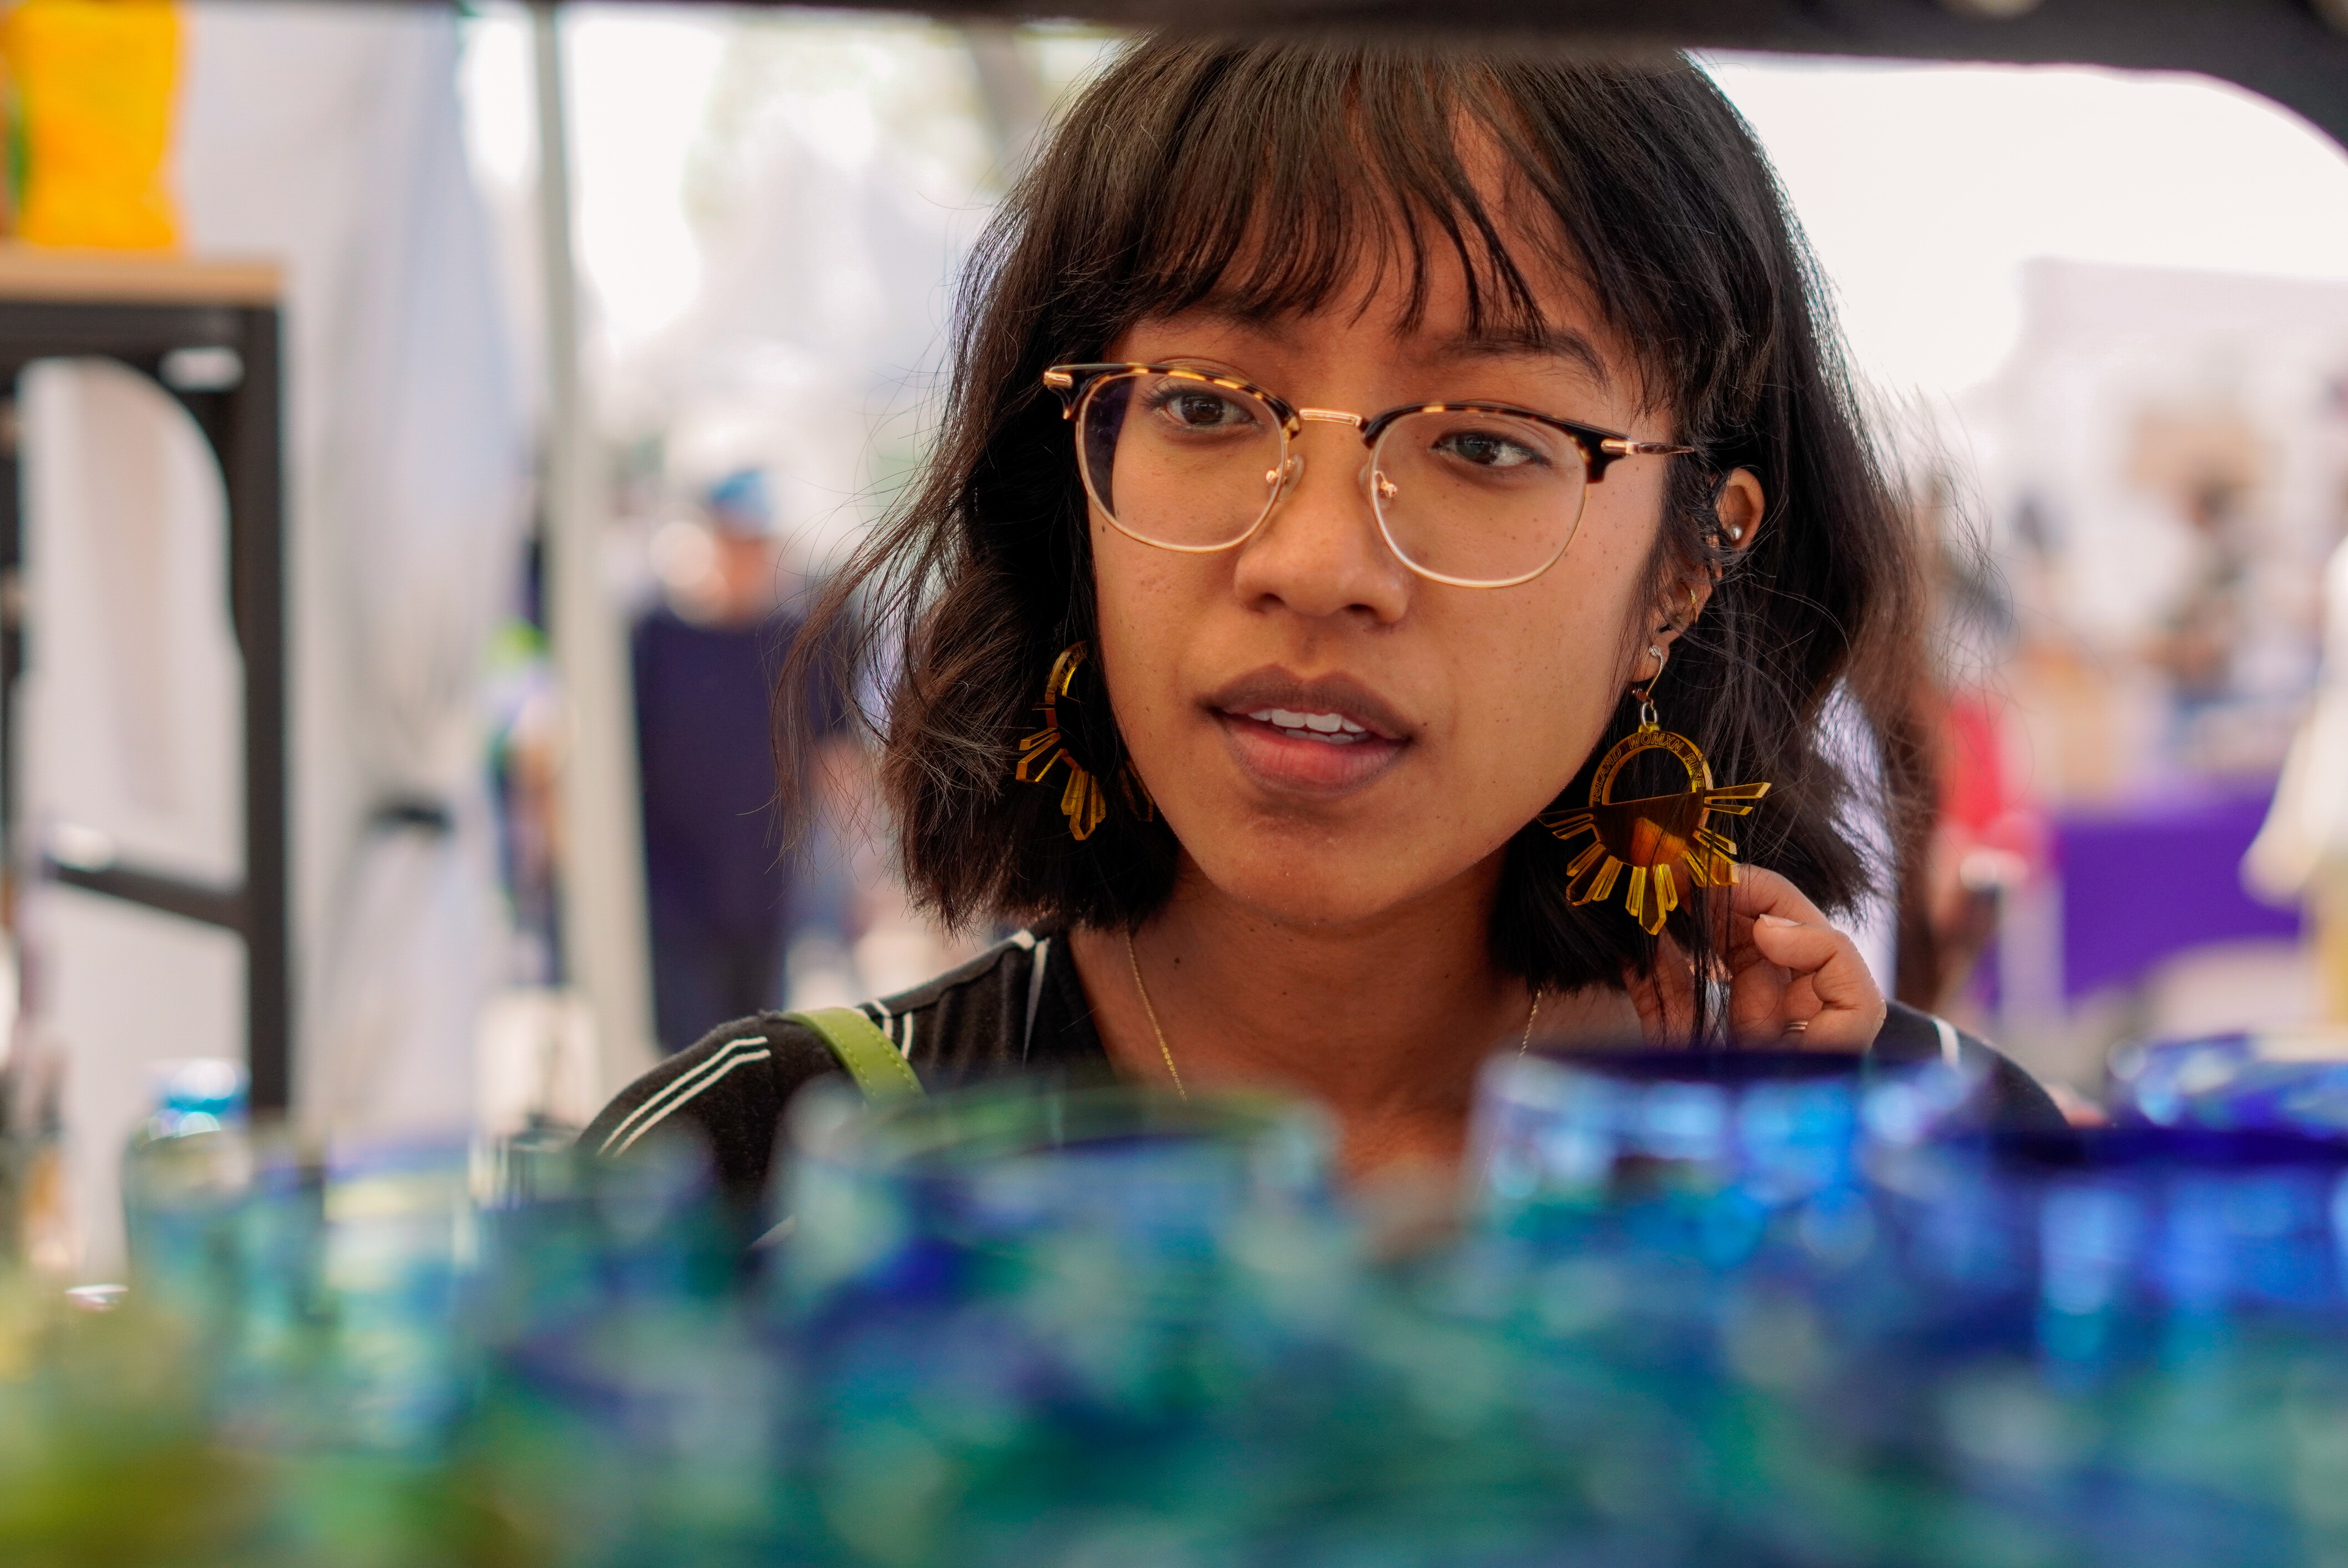 A student examines glassware at a Craft Faire's booth